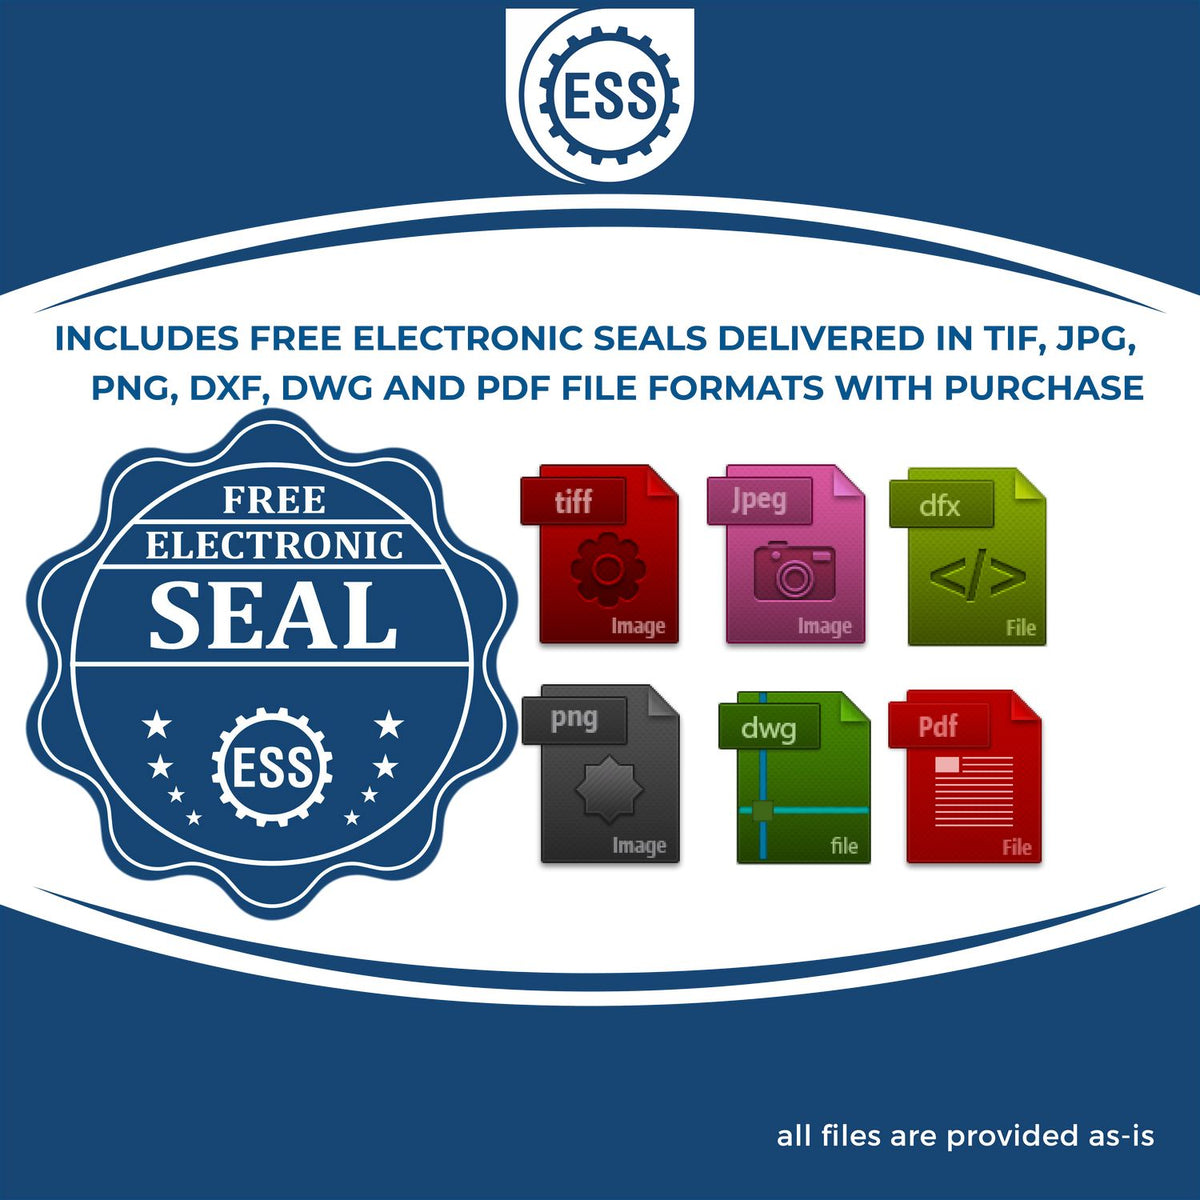 An infographic for the free electronic seal for the Gift Arkansas Land Surveyor Seal illustrating the different file type icons such as DXF, DWG, TIF, JPG and PNG.